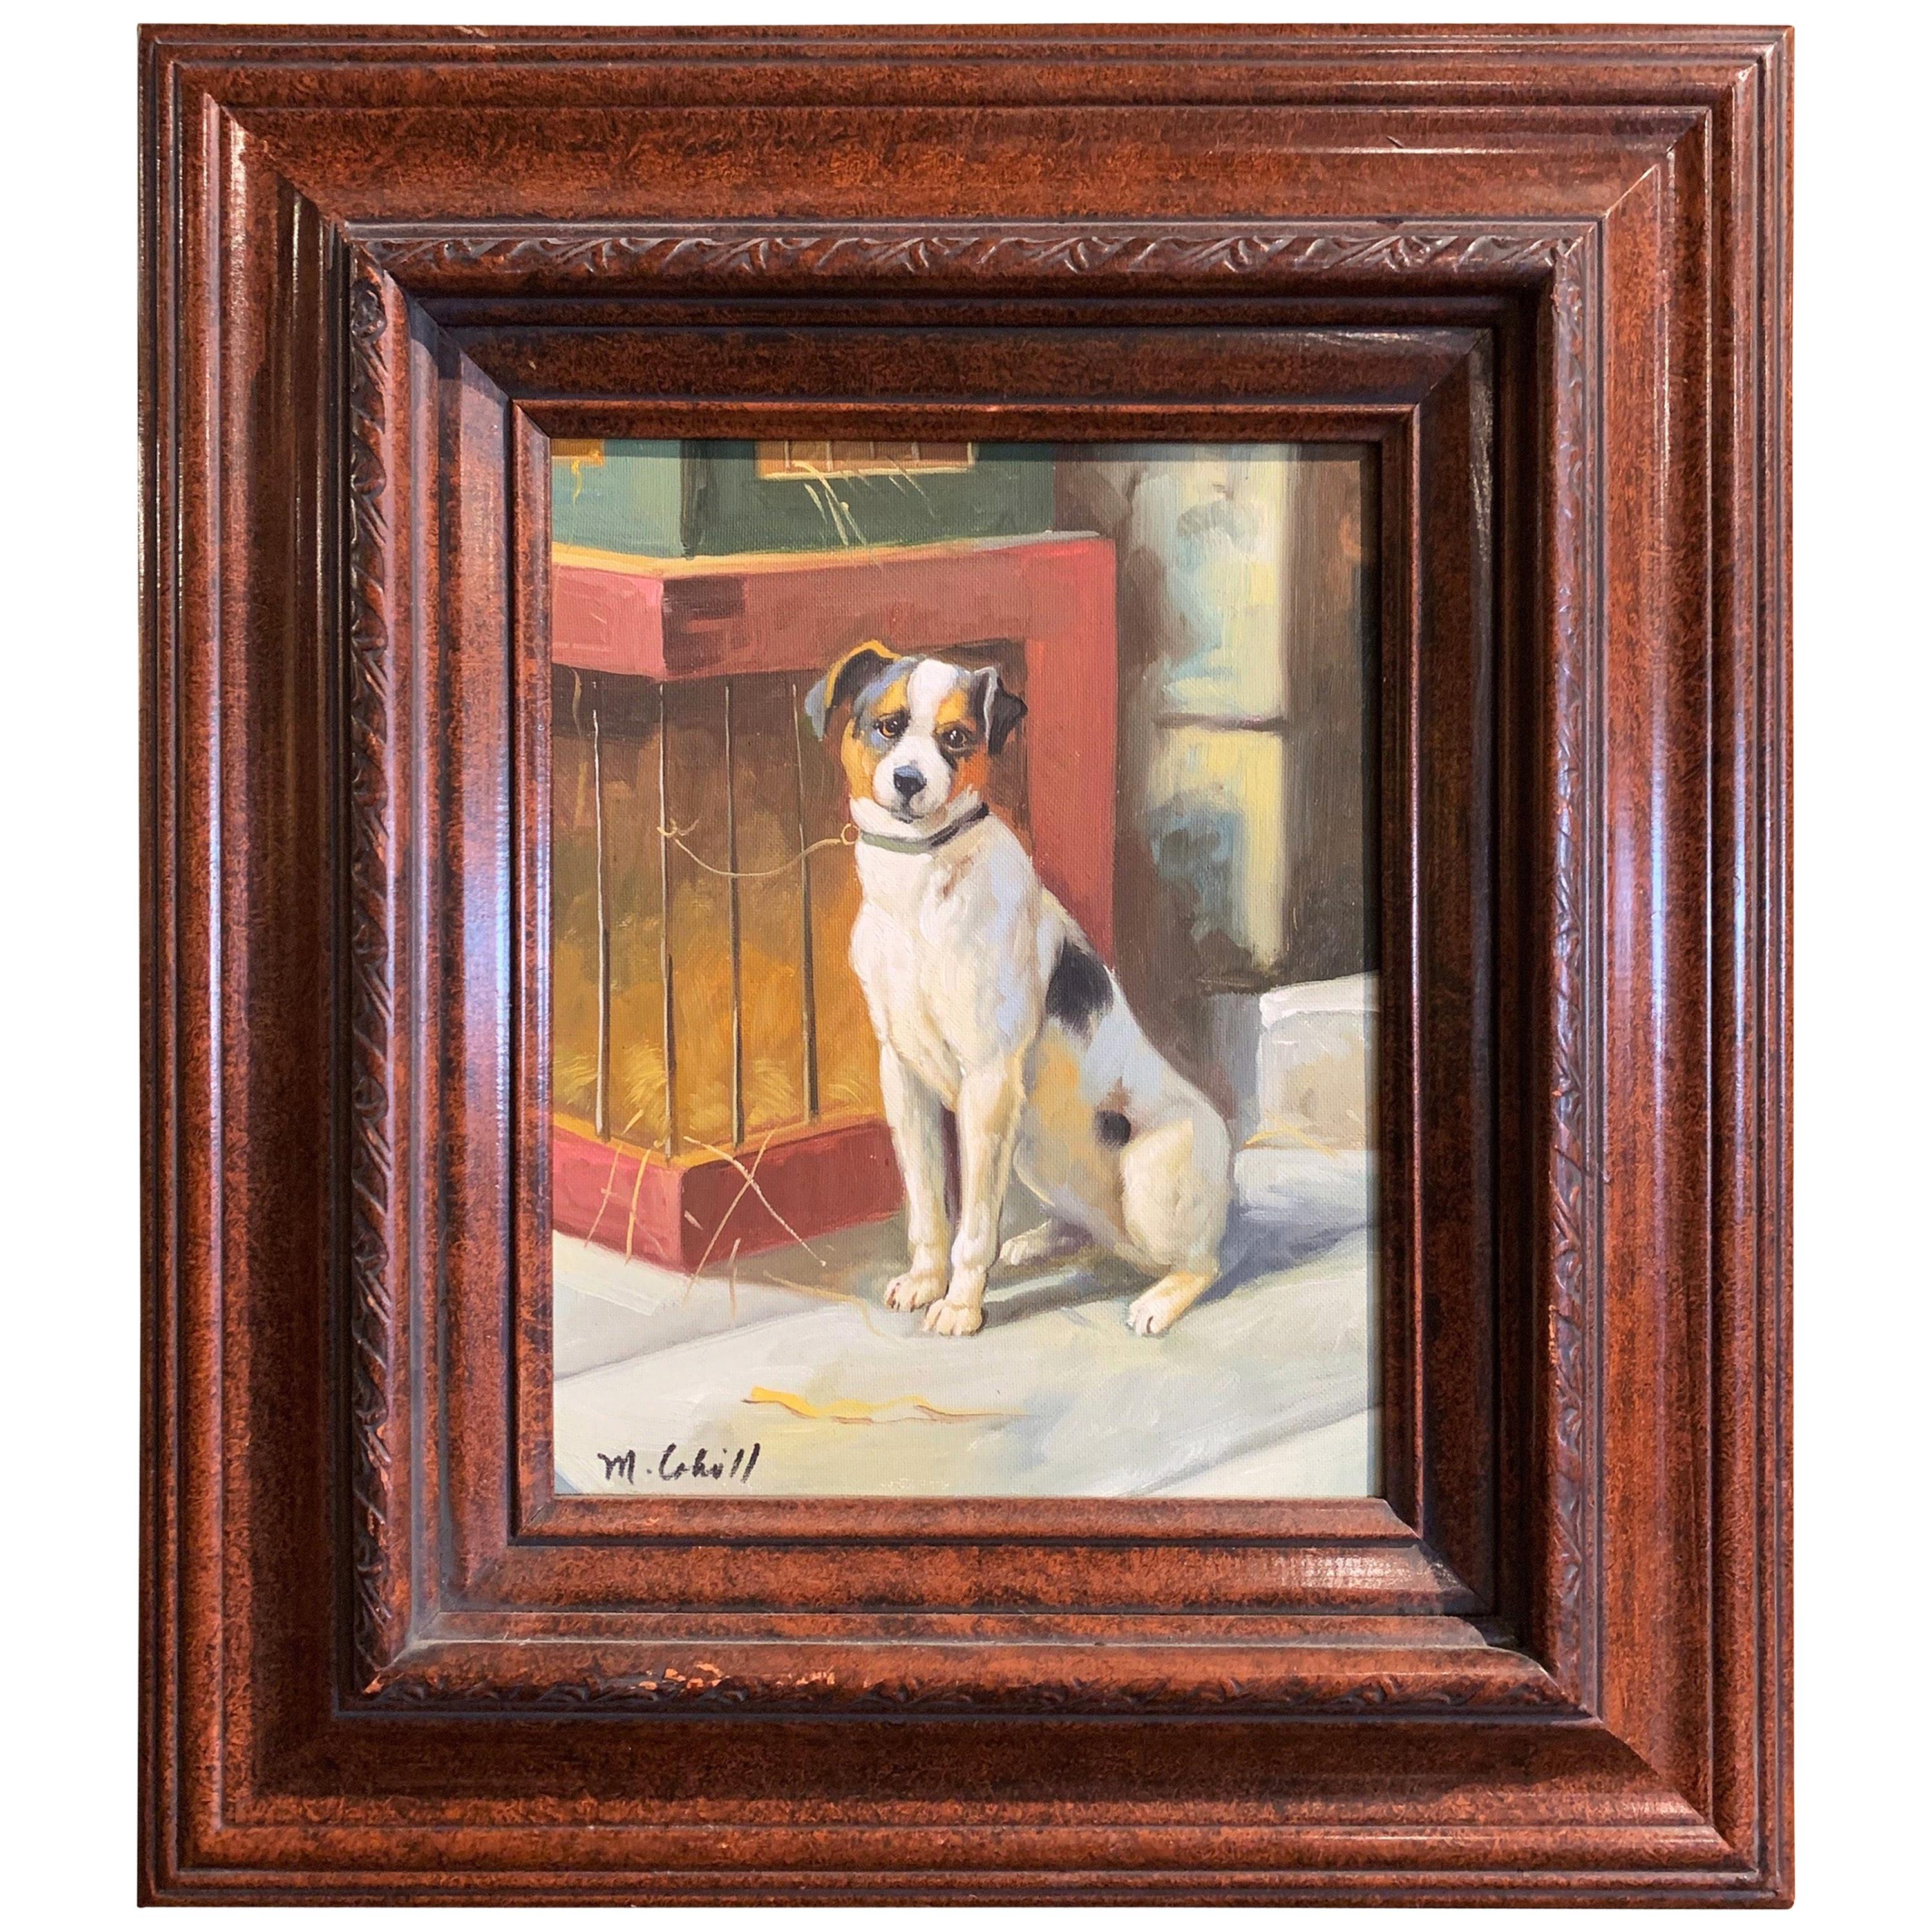 Vintage Oil on Canvas Terrier Painting in Carved Frame Signed M. Cahill